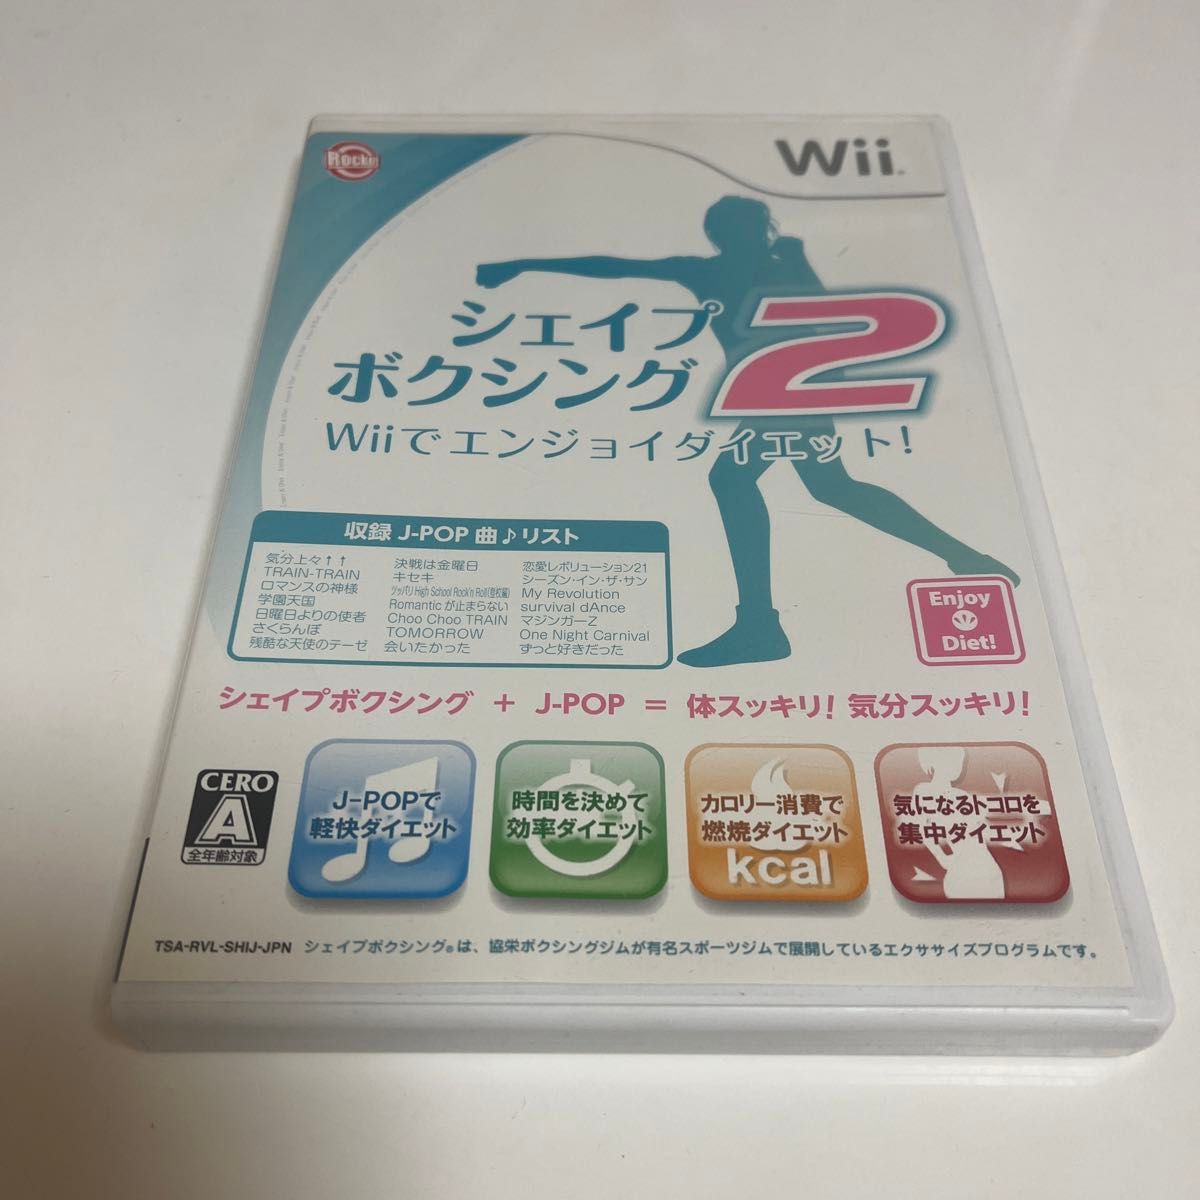 【Wii】 シェイプボクシング2 Wiiでエンジョイダイエット！